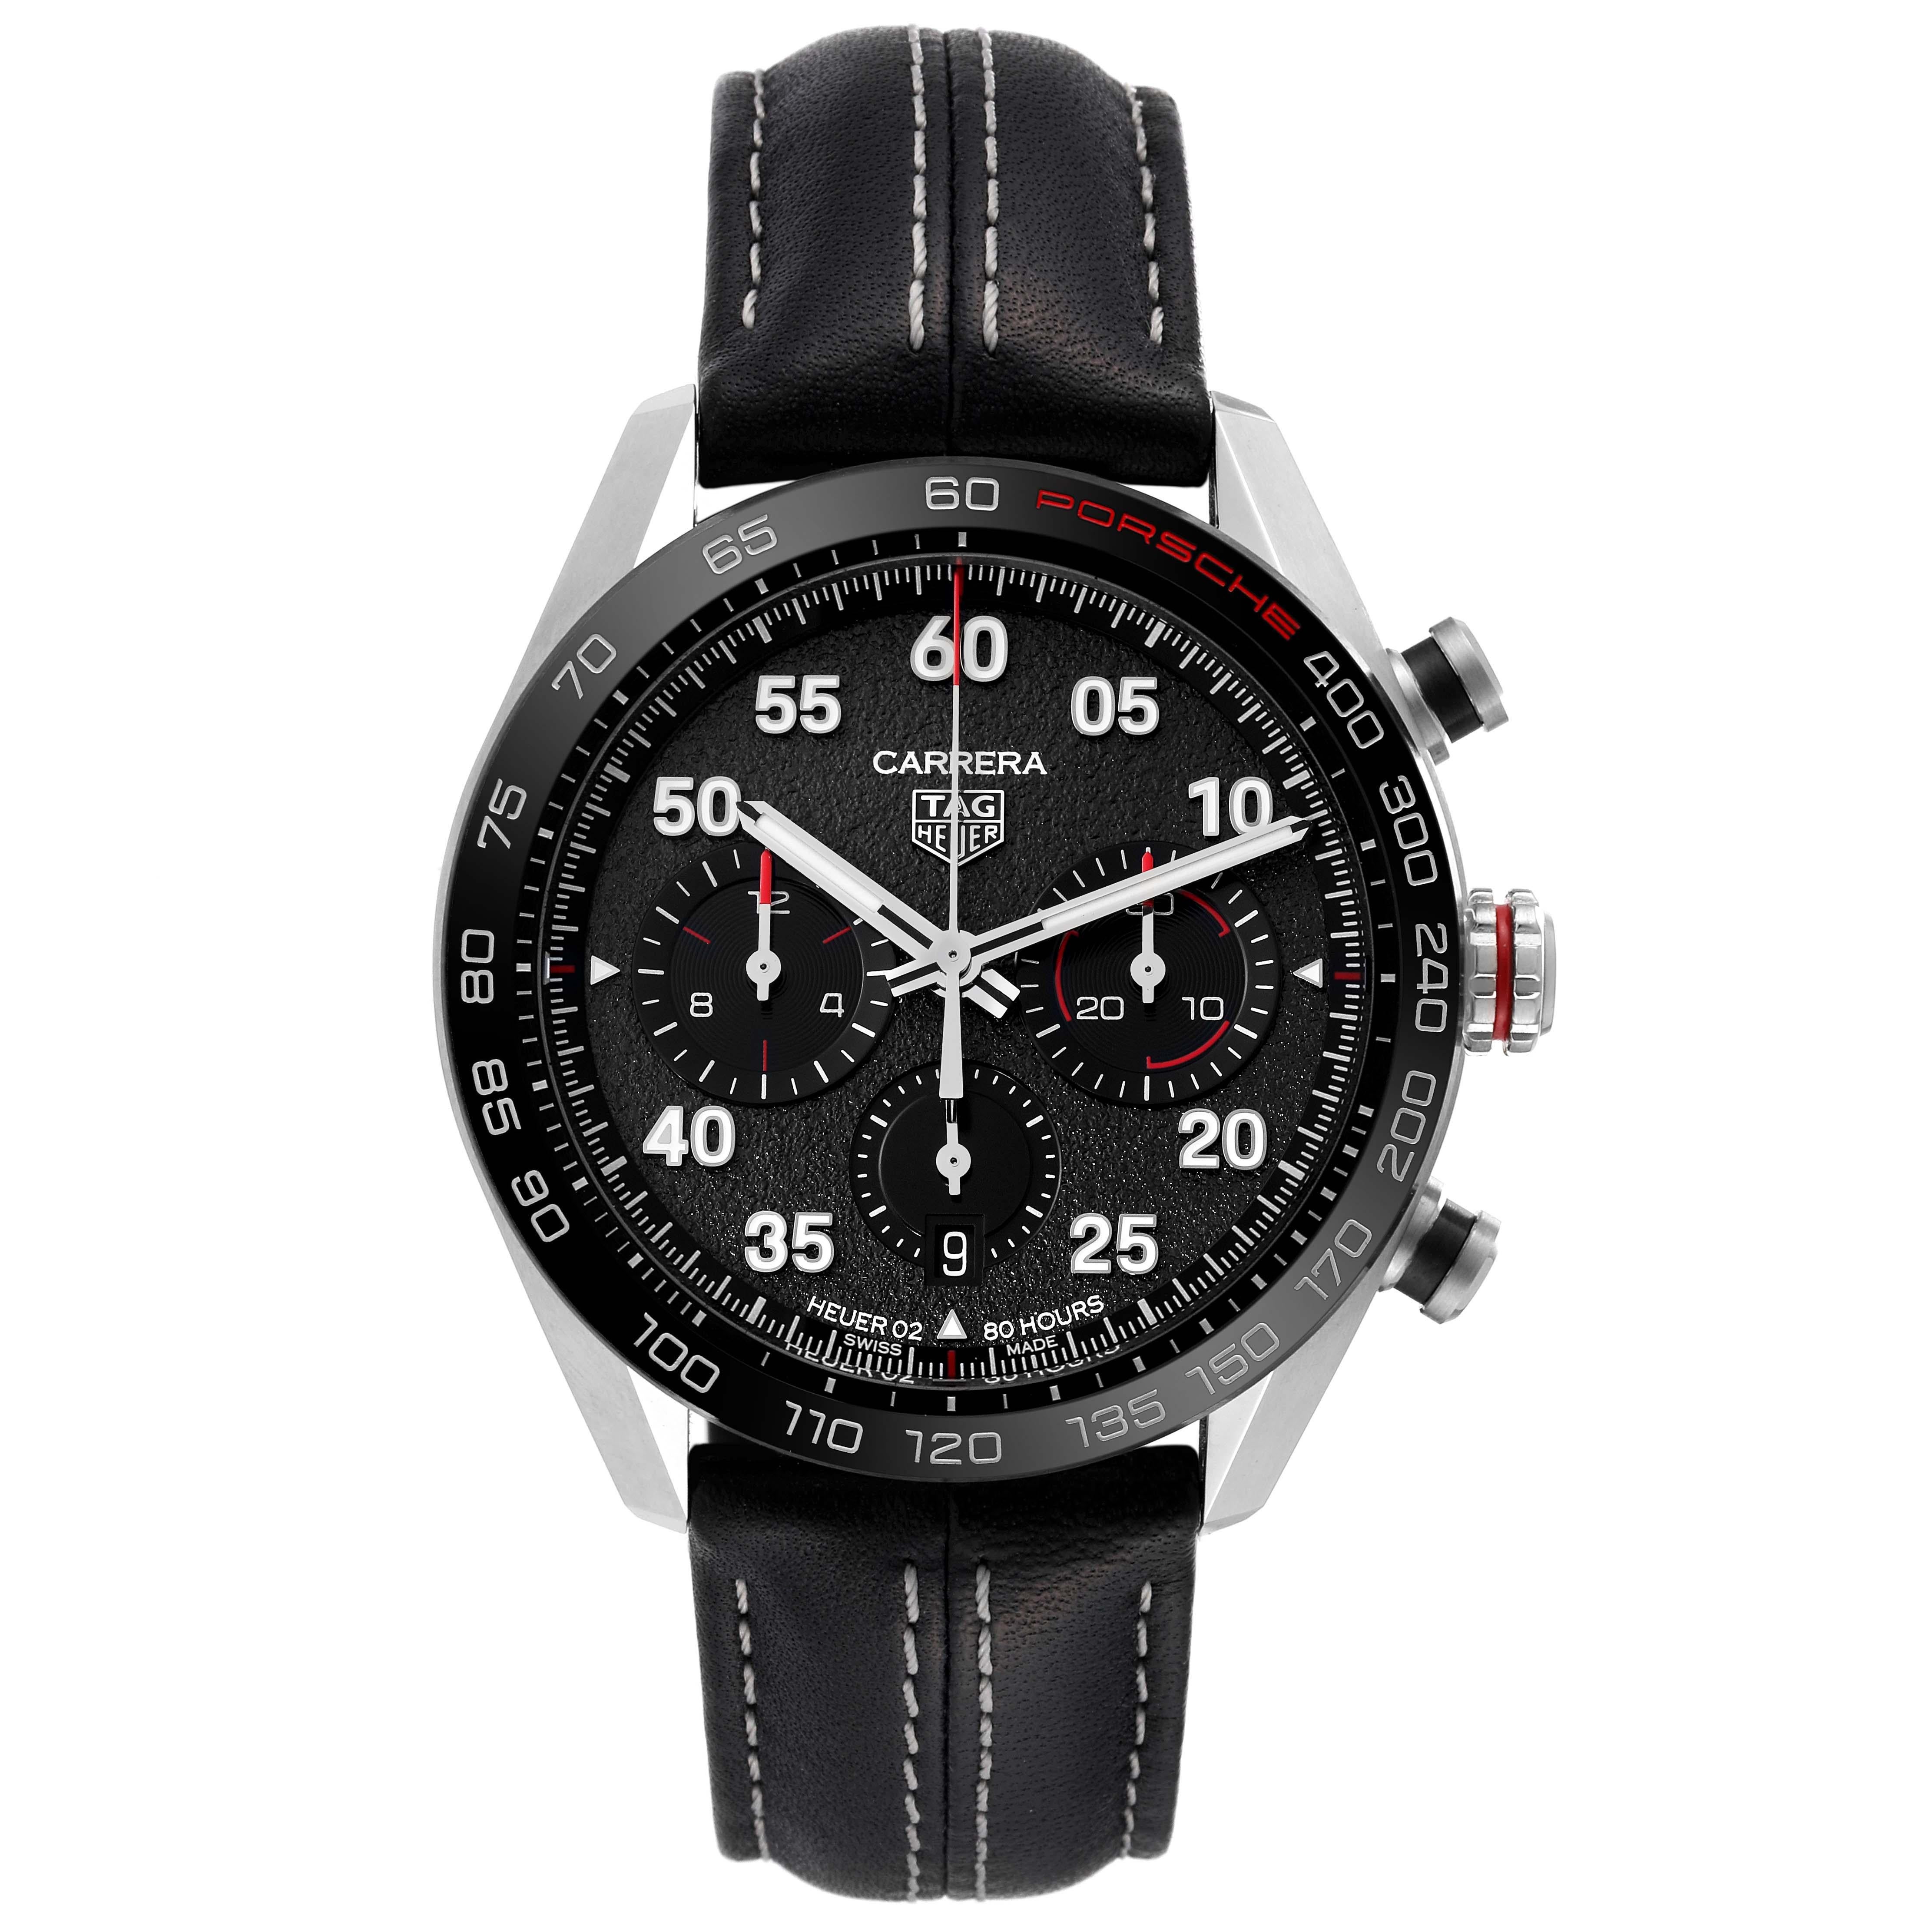 Tag Heuer Carrera Porsche Special Edition Steel Mens Watch CBN2A1F Box Card. Automatic self-winding chronograph movement. Stainless steel round case 44.0 mm. Transparent exhibition sapphire crystal caseback. Black ceramic tachymeter scale bezel.